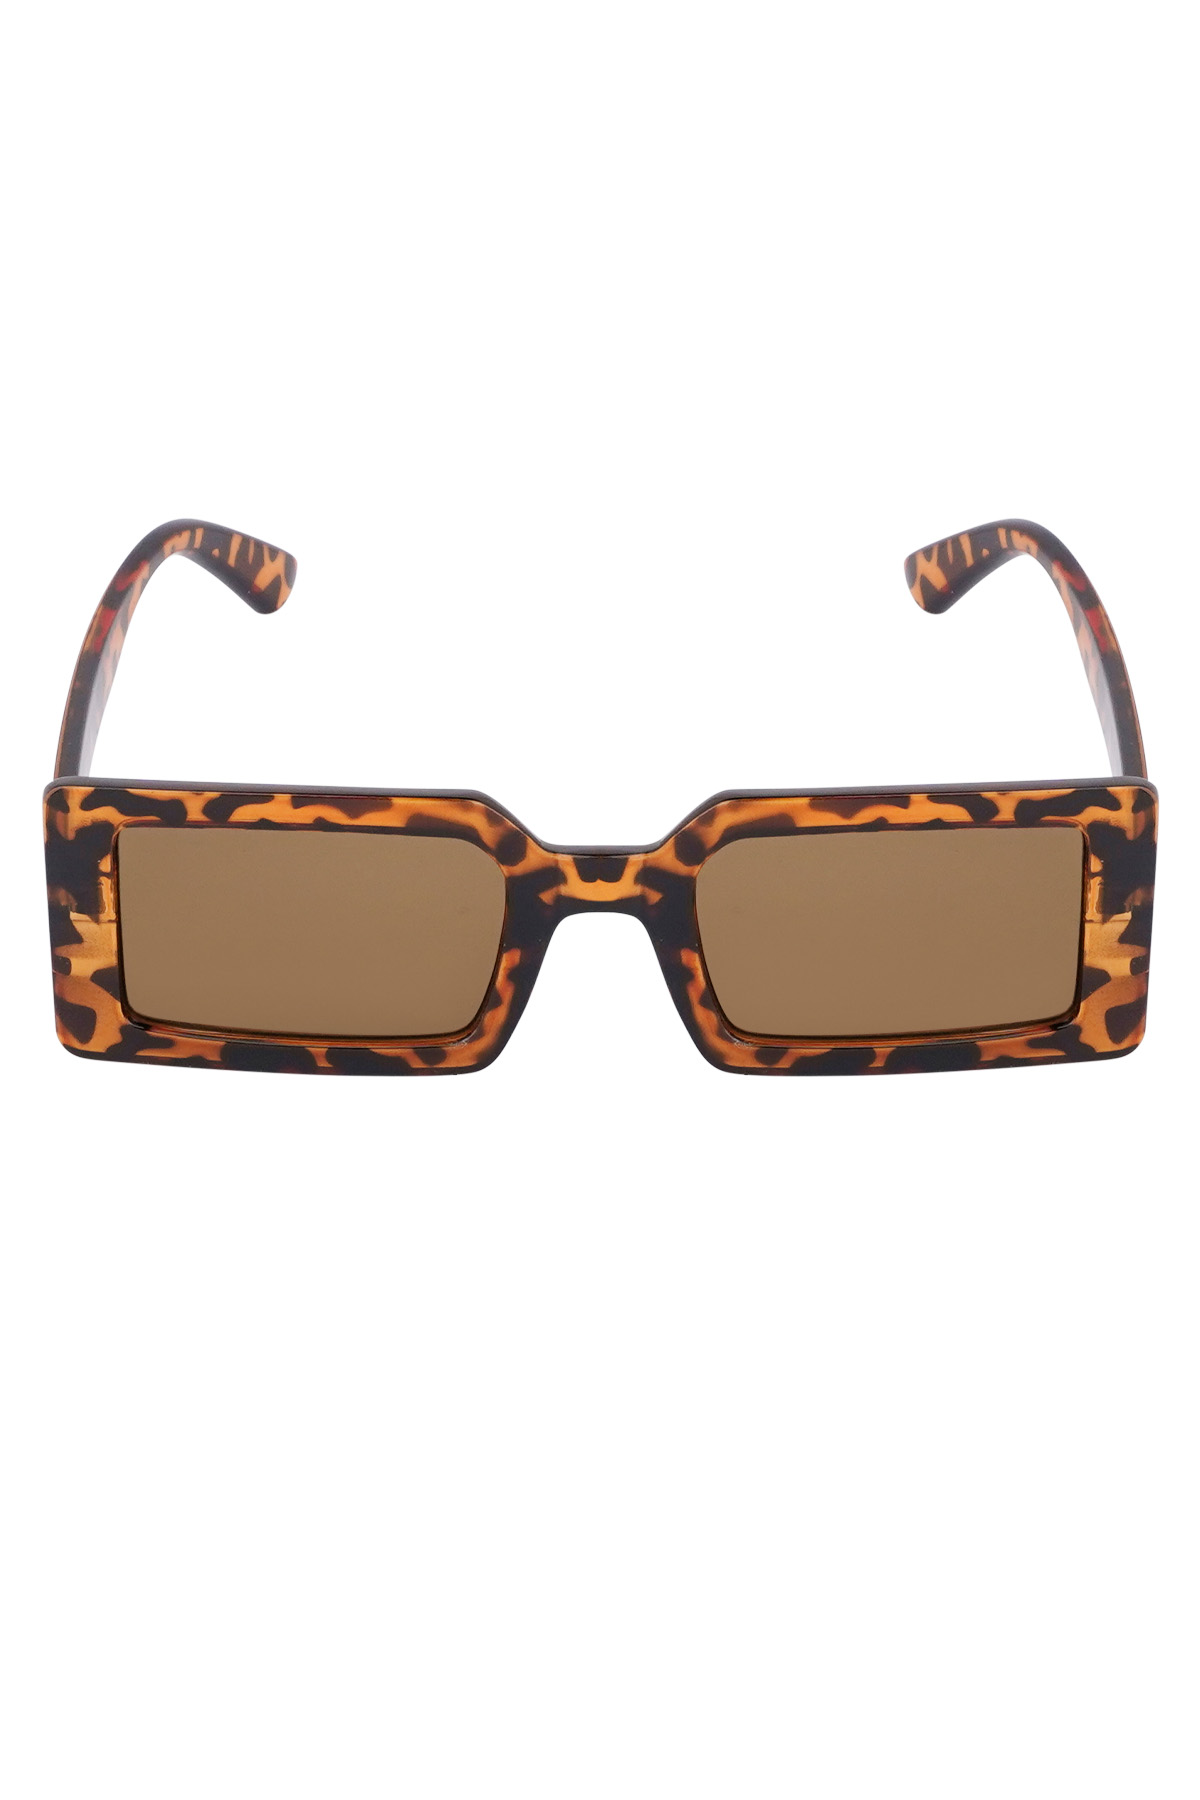 Shimmerglow sunglasses - brown h5 Picture4